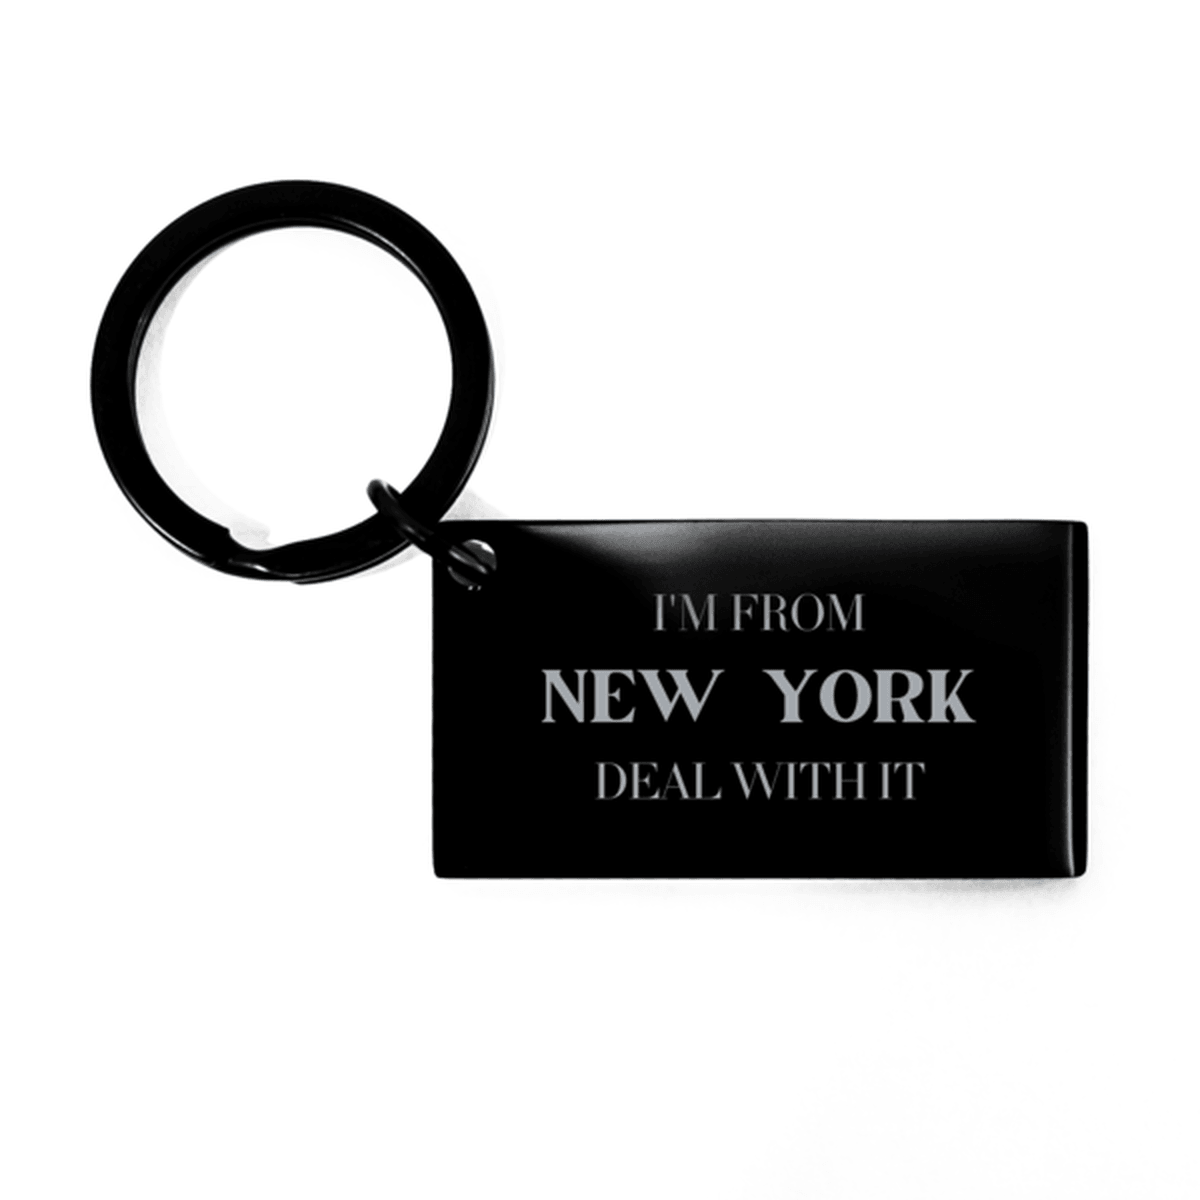 I'm from New York, Deal with it, Proud New York State Gifts, New York Keychain Gift Idea, Christmas Gifts for New York People, Coworkers, Colleague - Mallard Moon Gift Shop